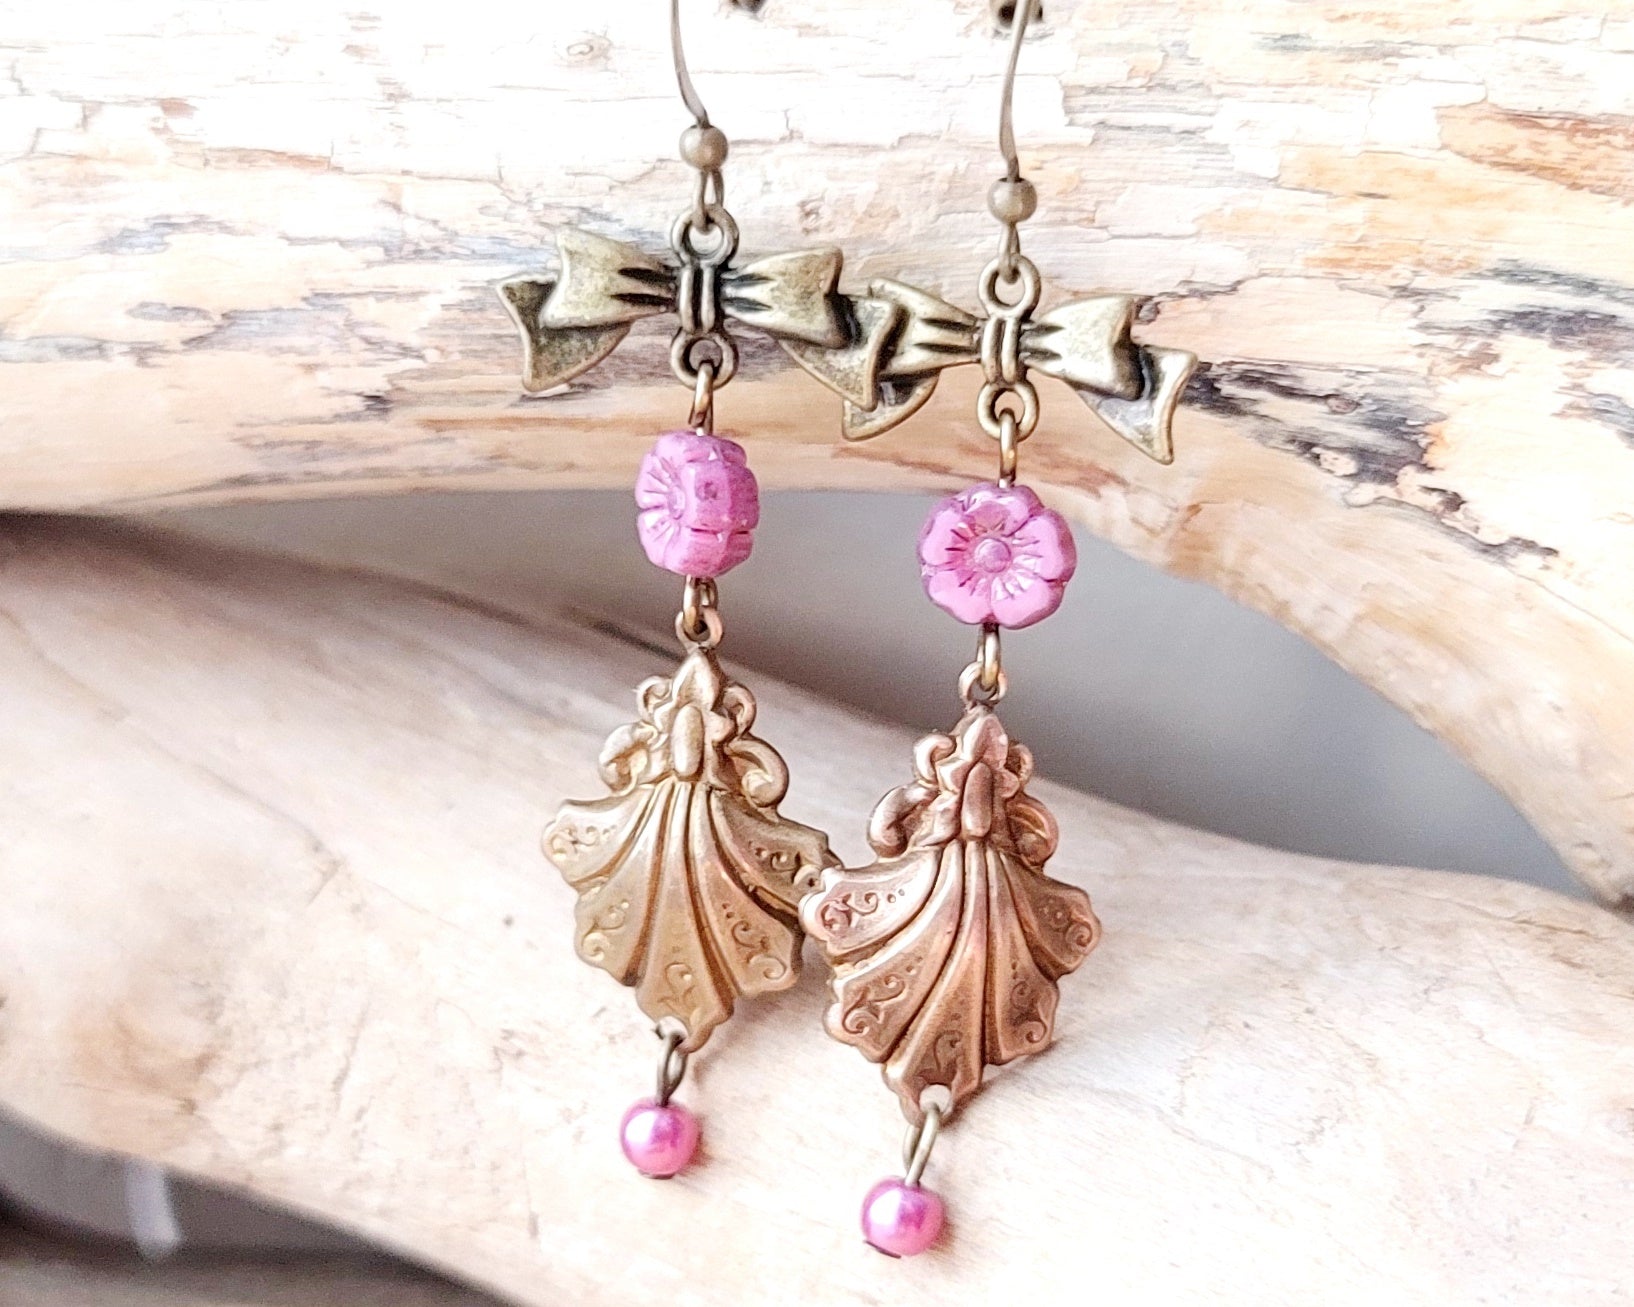 Vintage Romance Flower Shell Bow Earrings made with Upcycled Vintage Shells, Pink Flowers and Bows. Displayed on beach wood